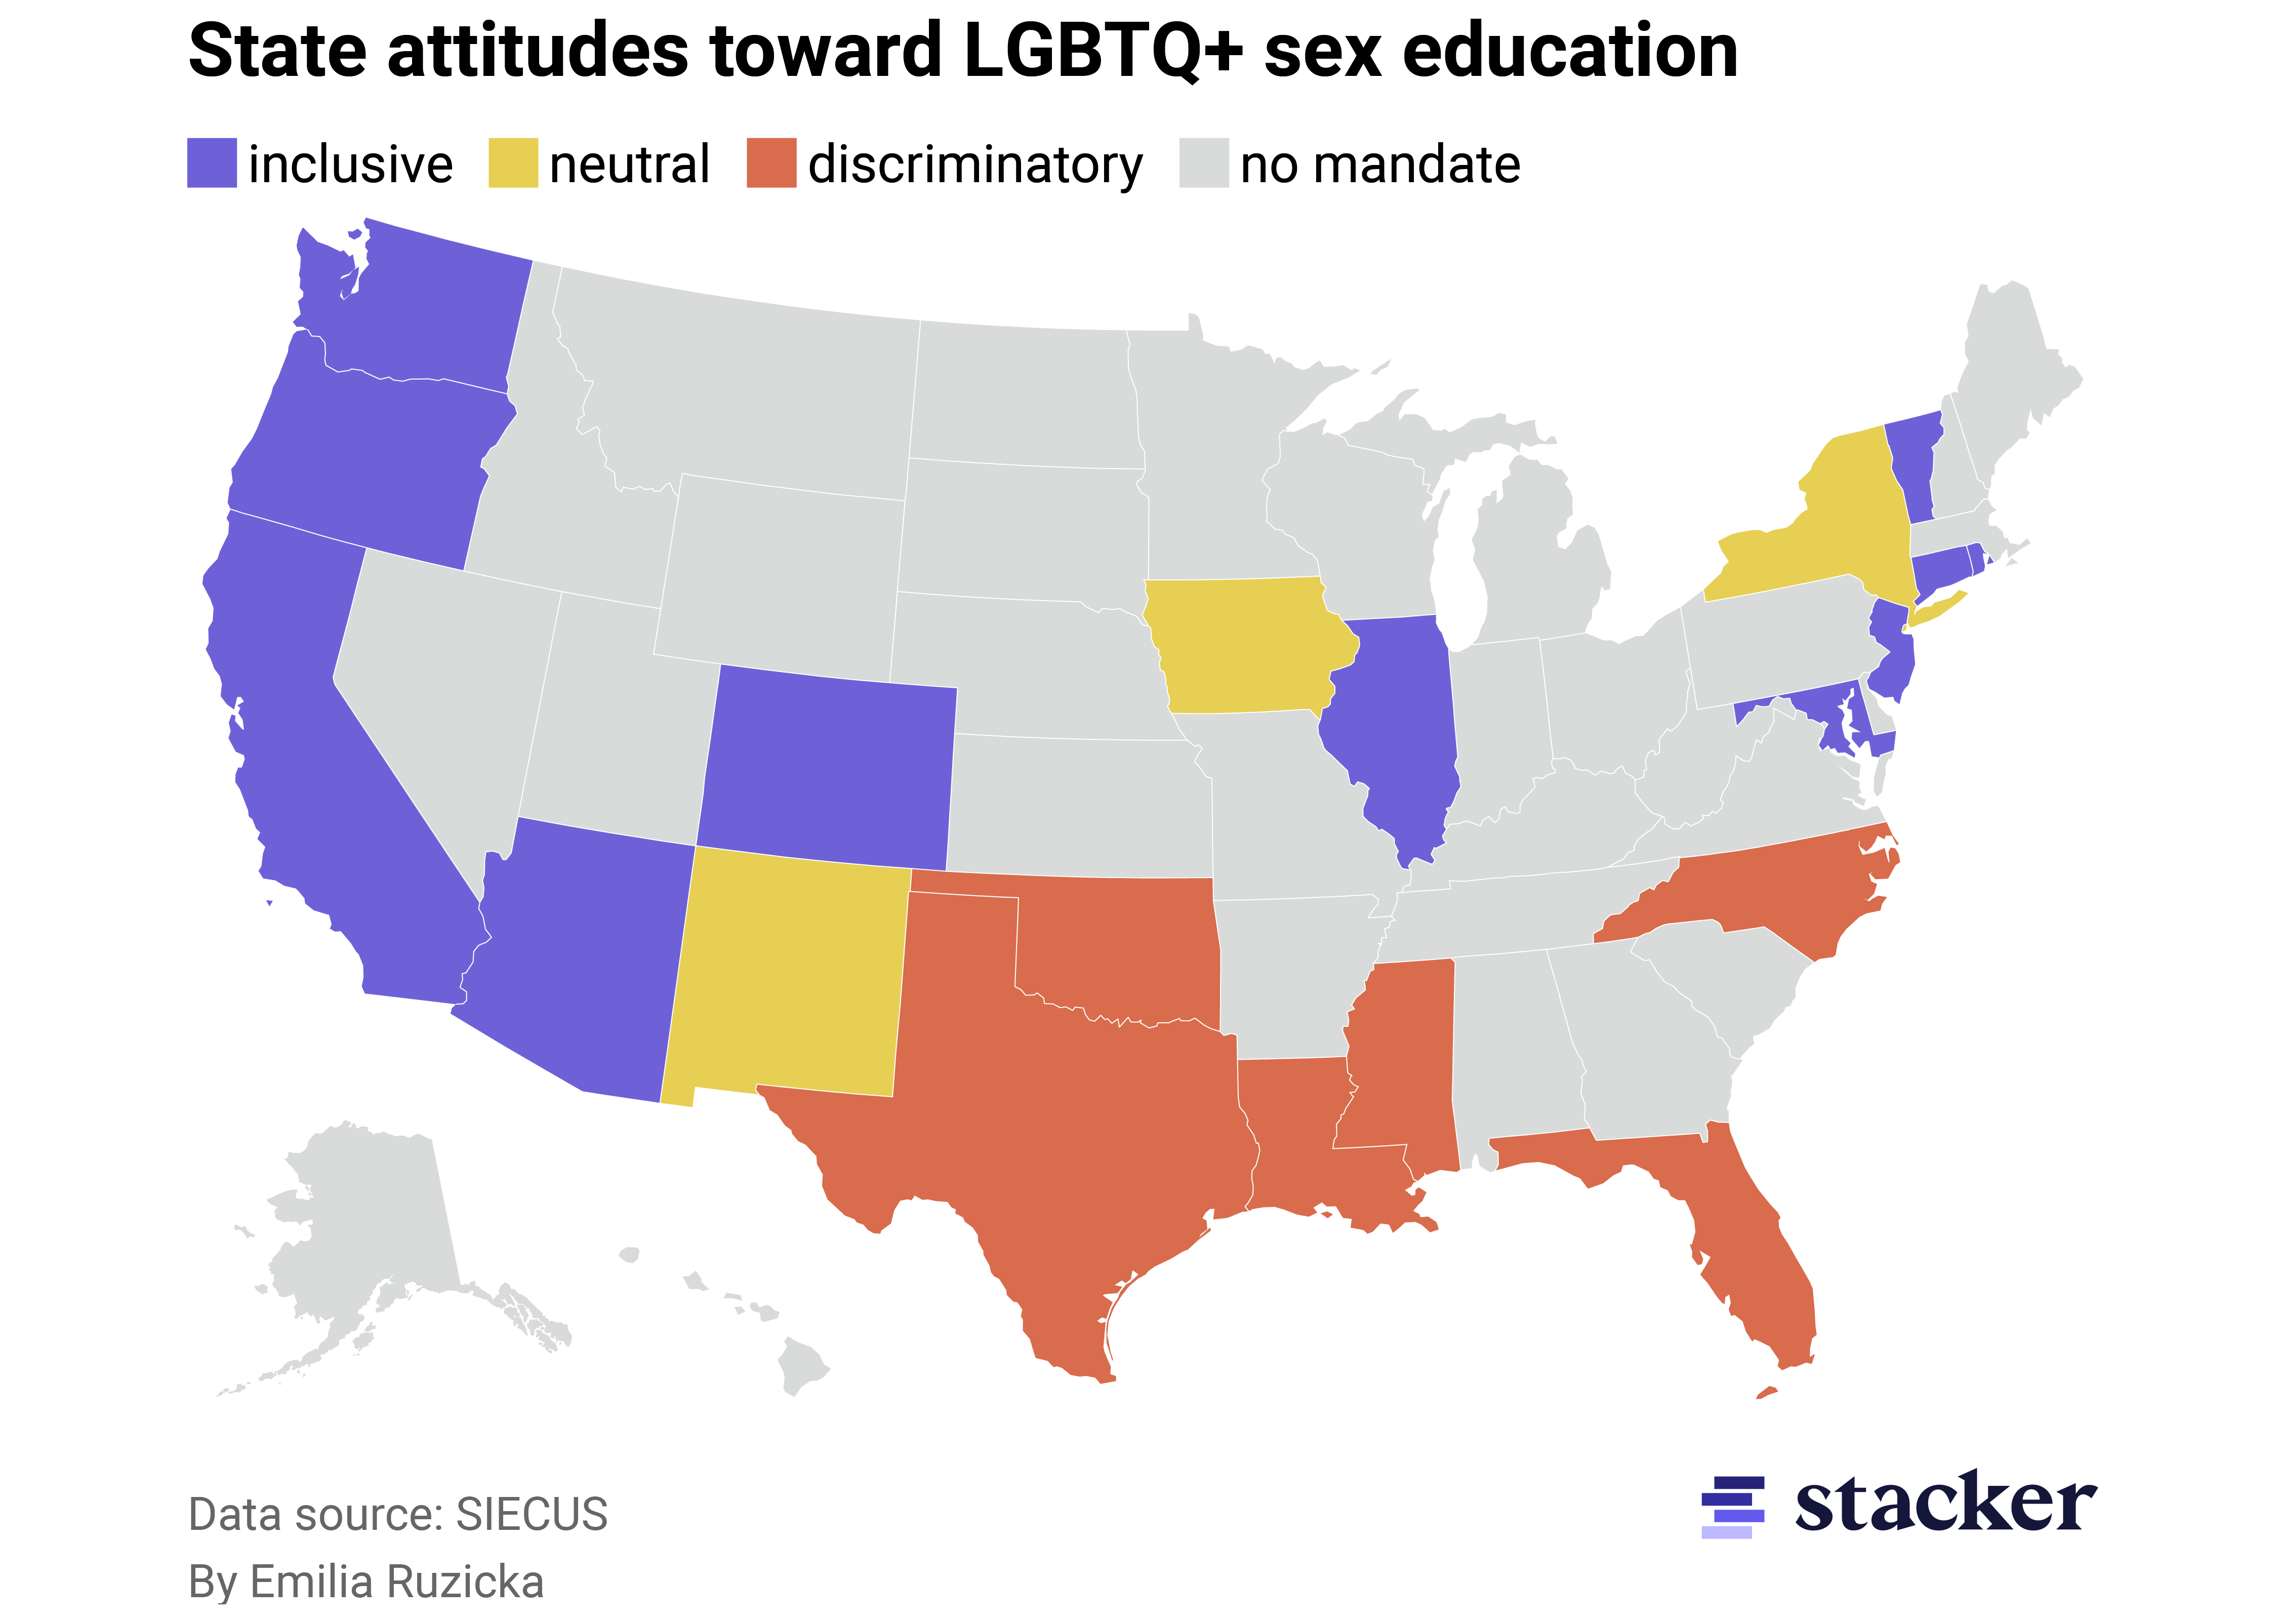 A map showing state attitudes toward LGBTQ+ sex education